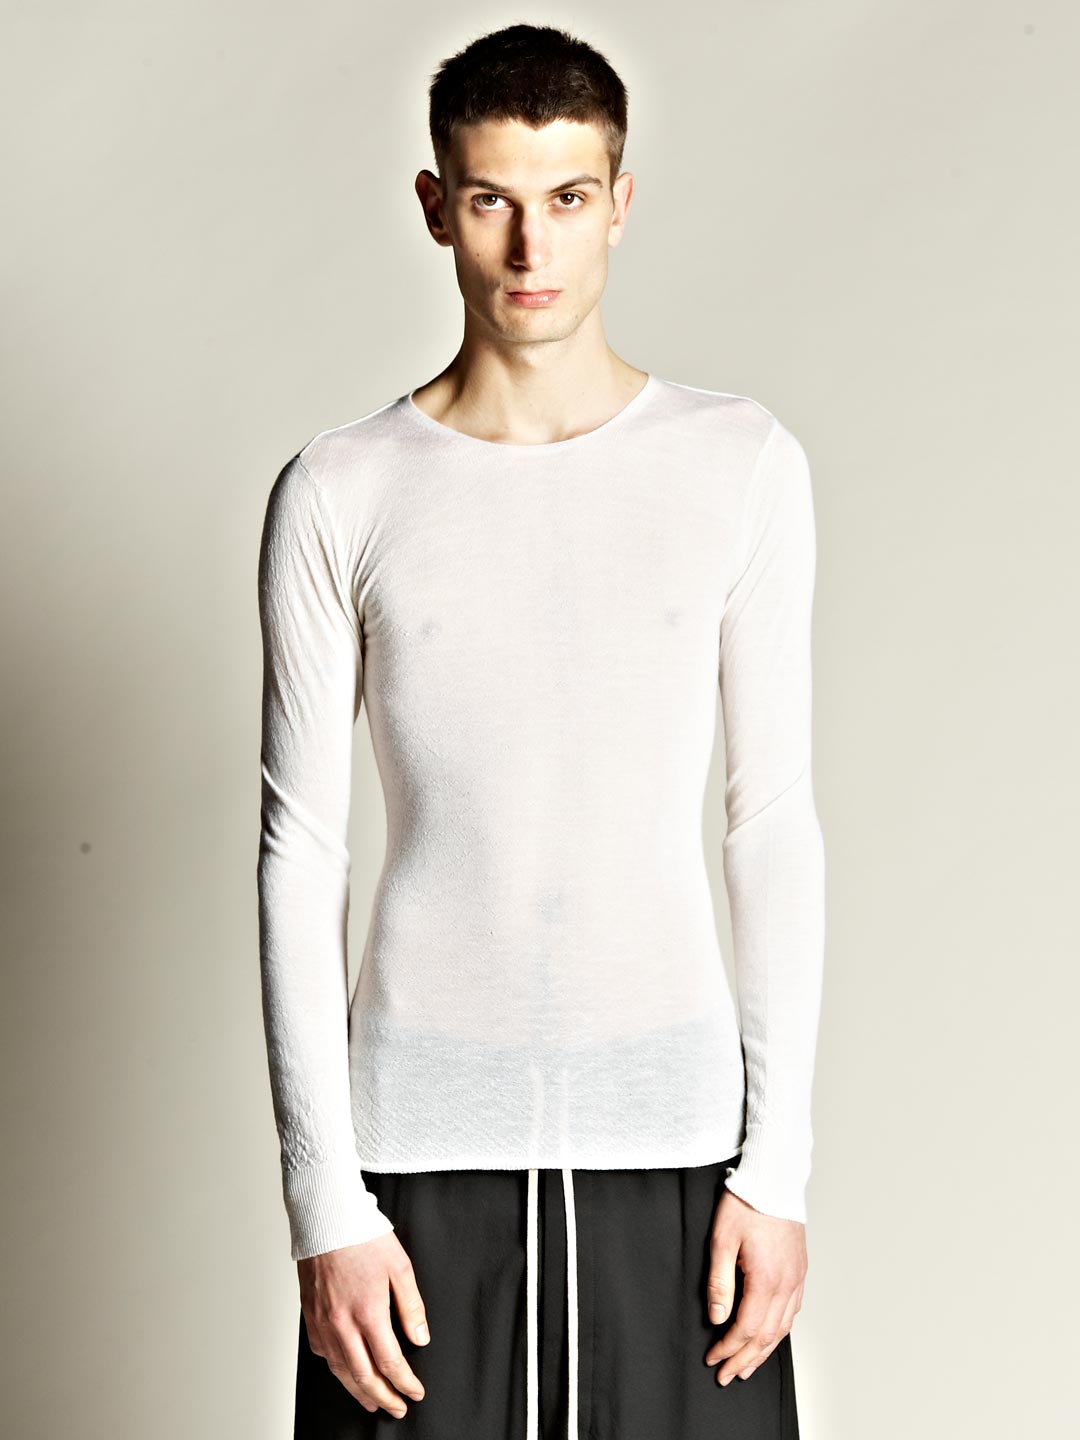 Lyst - Rick Owens Mens Cashmere Round Neck Sweater in Natural for Men